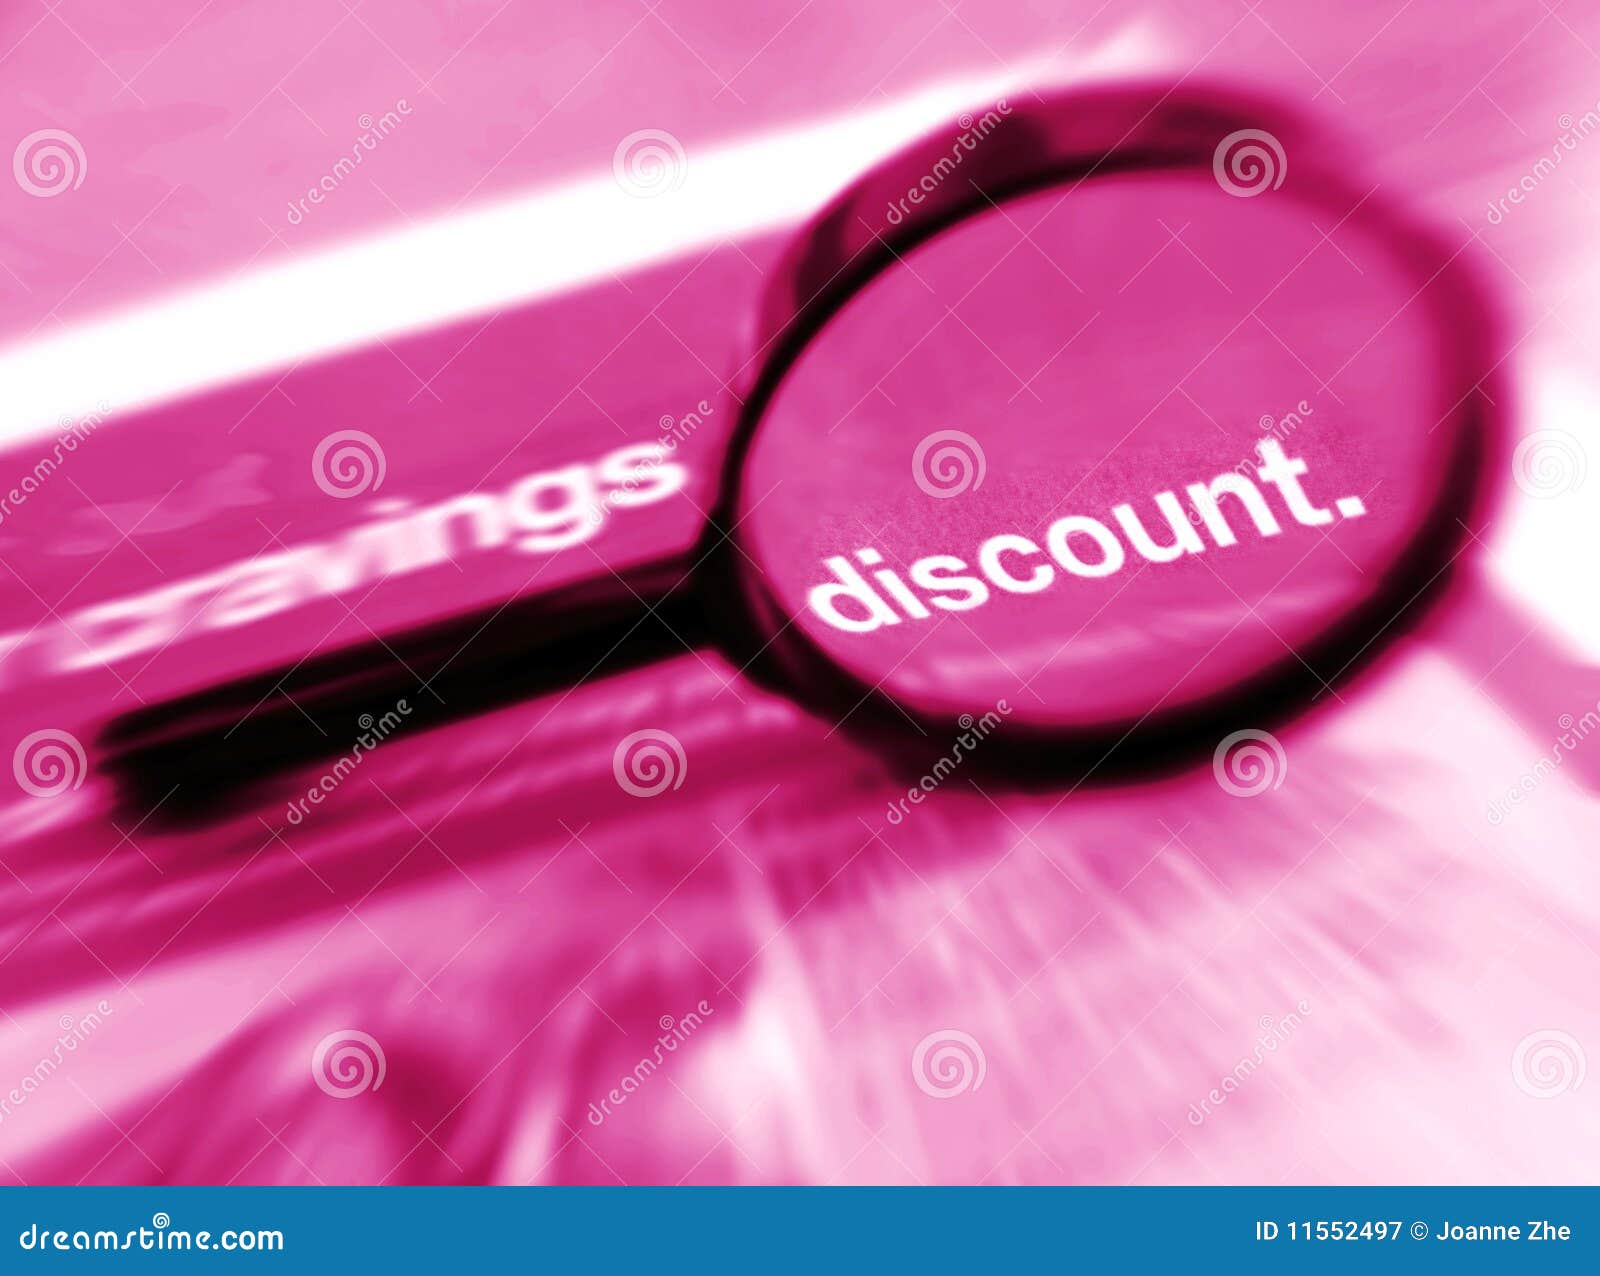 search for discount